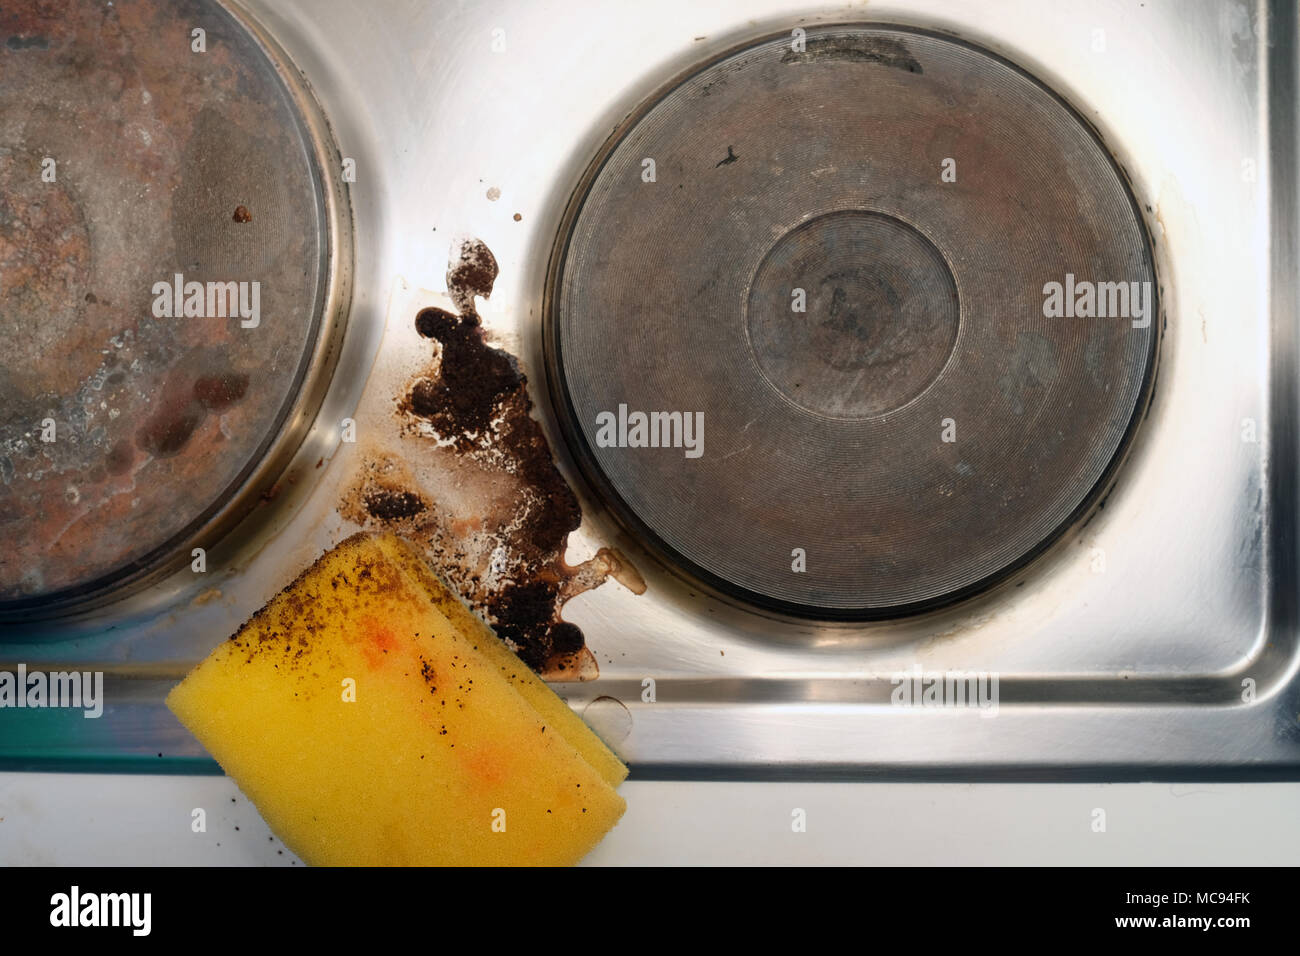 Sponge and stains from spilled coffeeremoving from a stove top Stock Photo